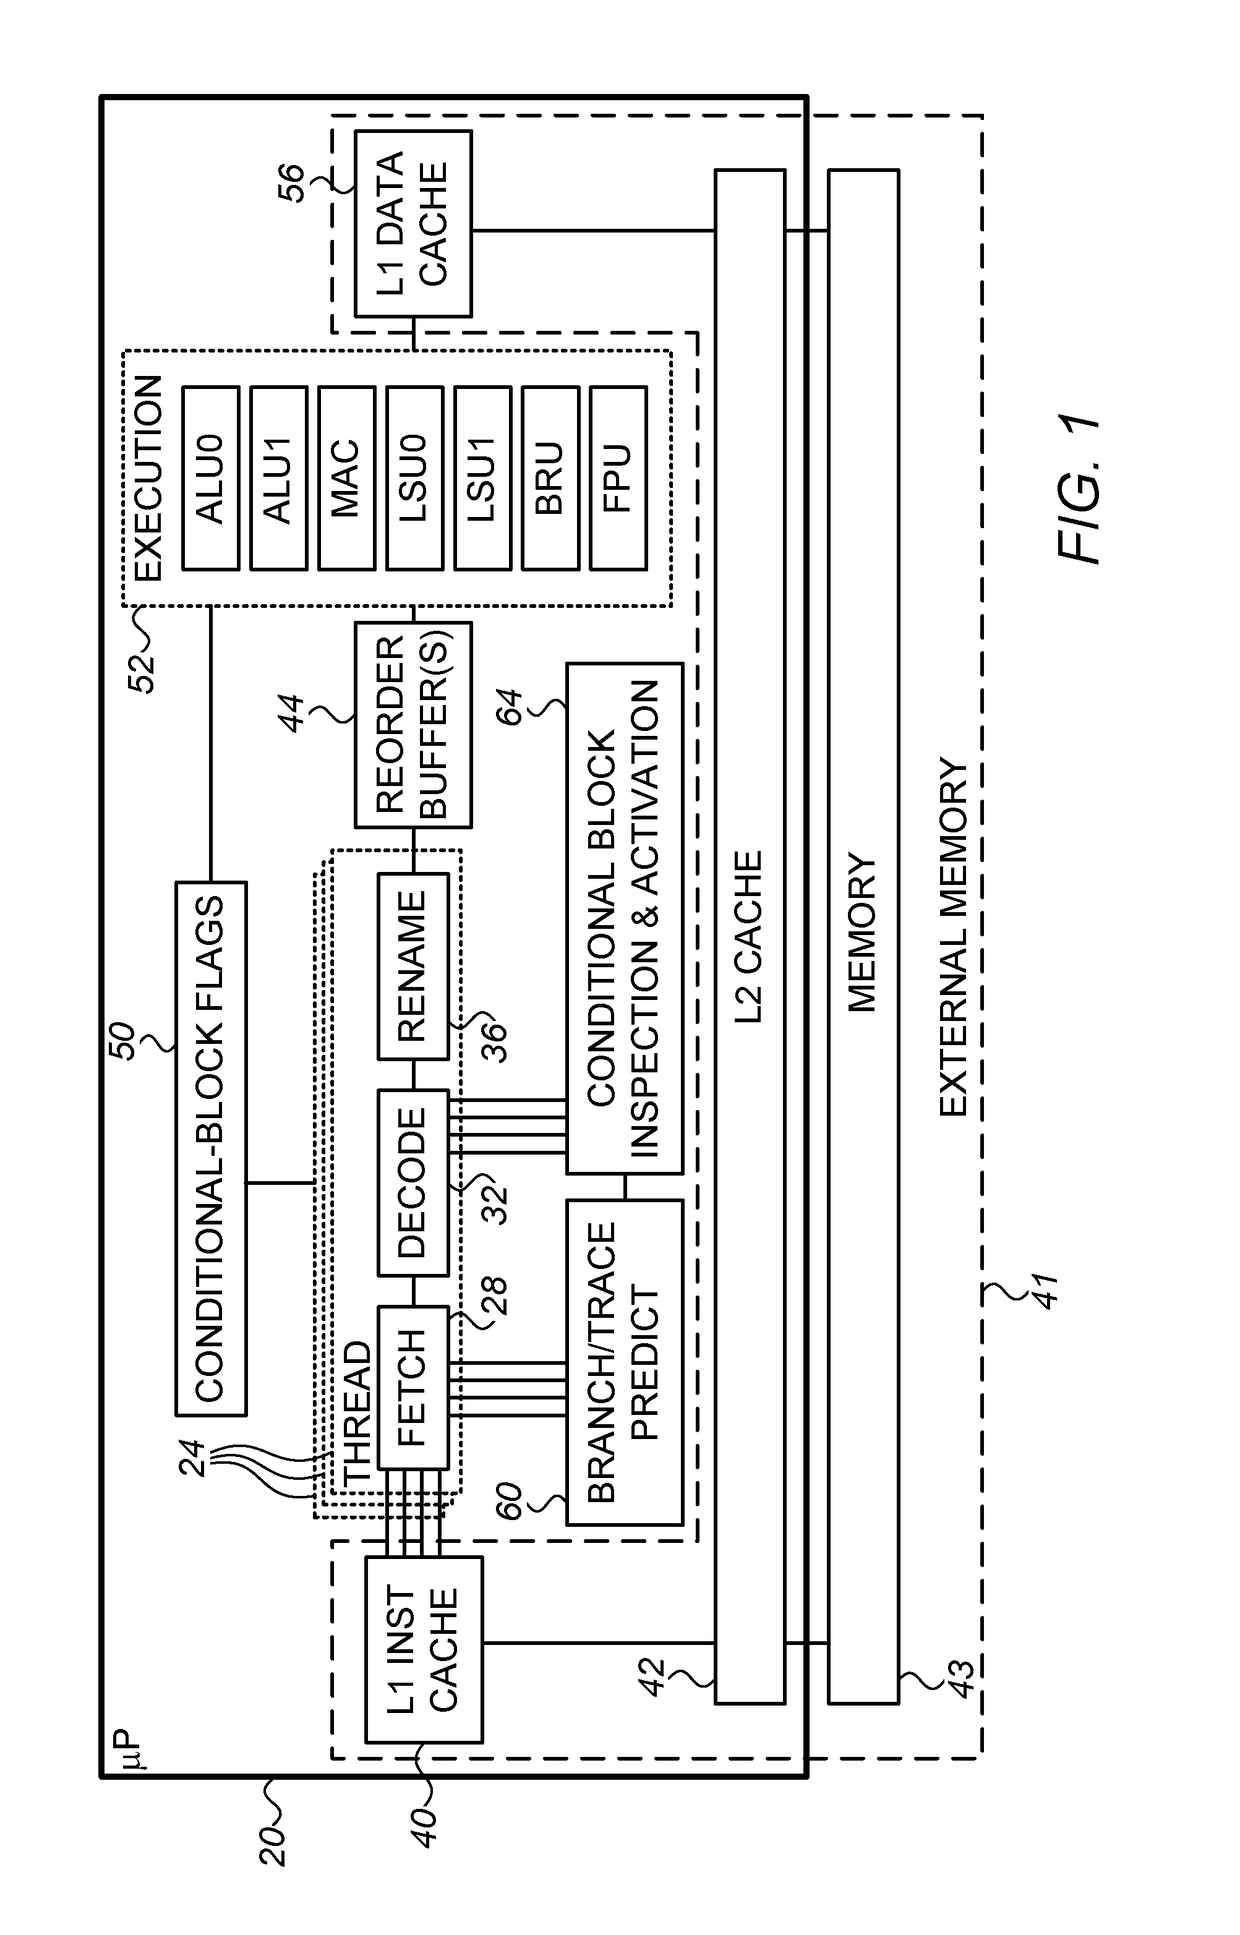 Hardware-based run-time mitigation of conditional branches